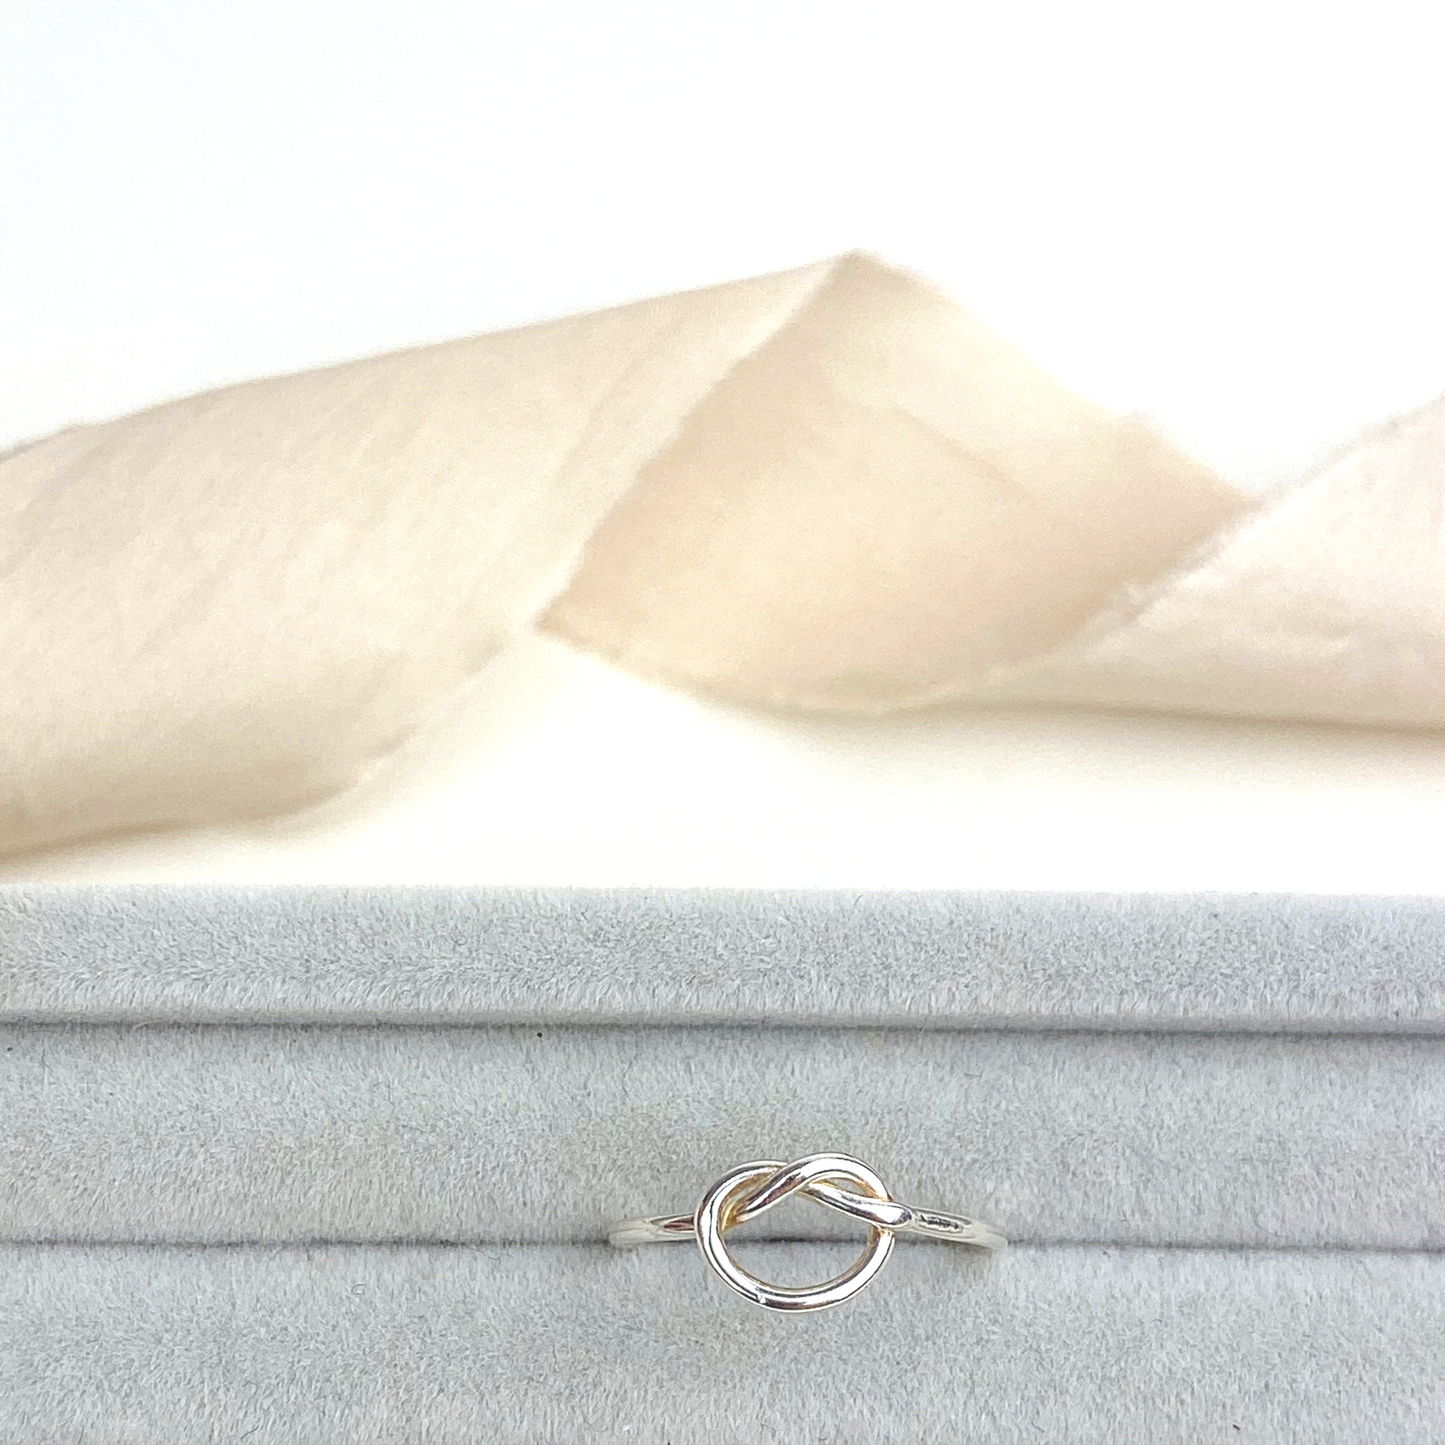 The Meg Knot Ring - sterling silver skinny ring - wedding and bridesmaid gift - handtied knot ring